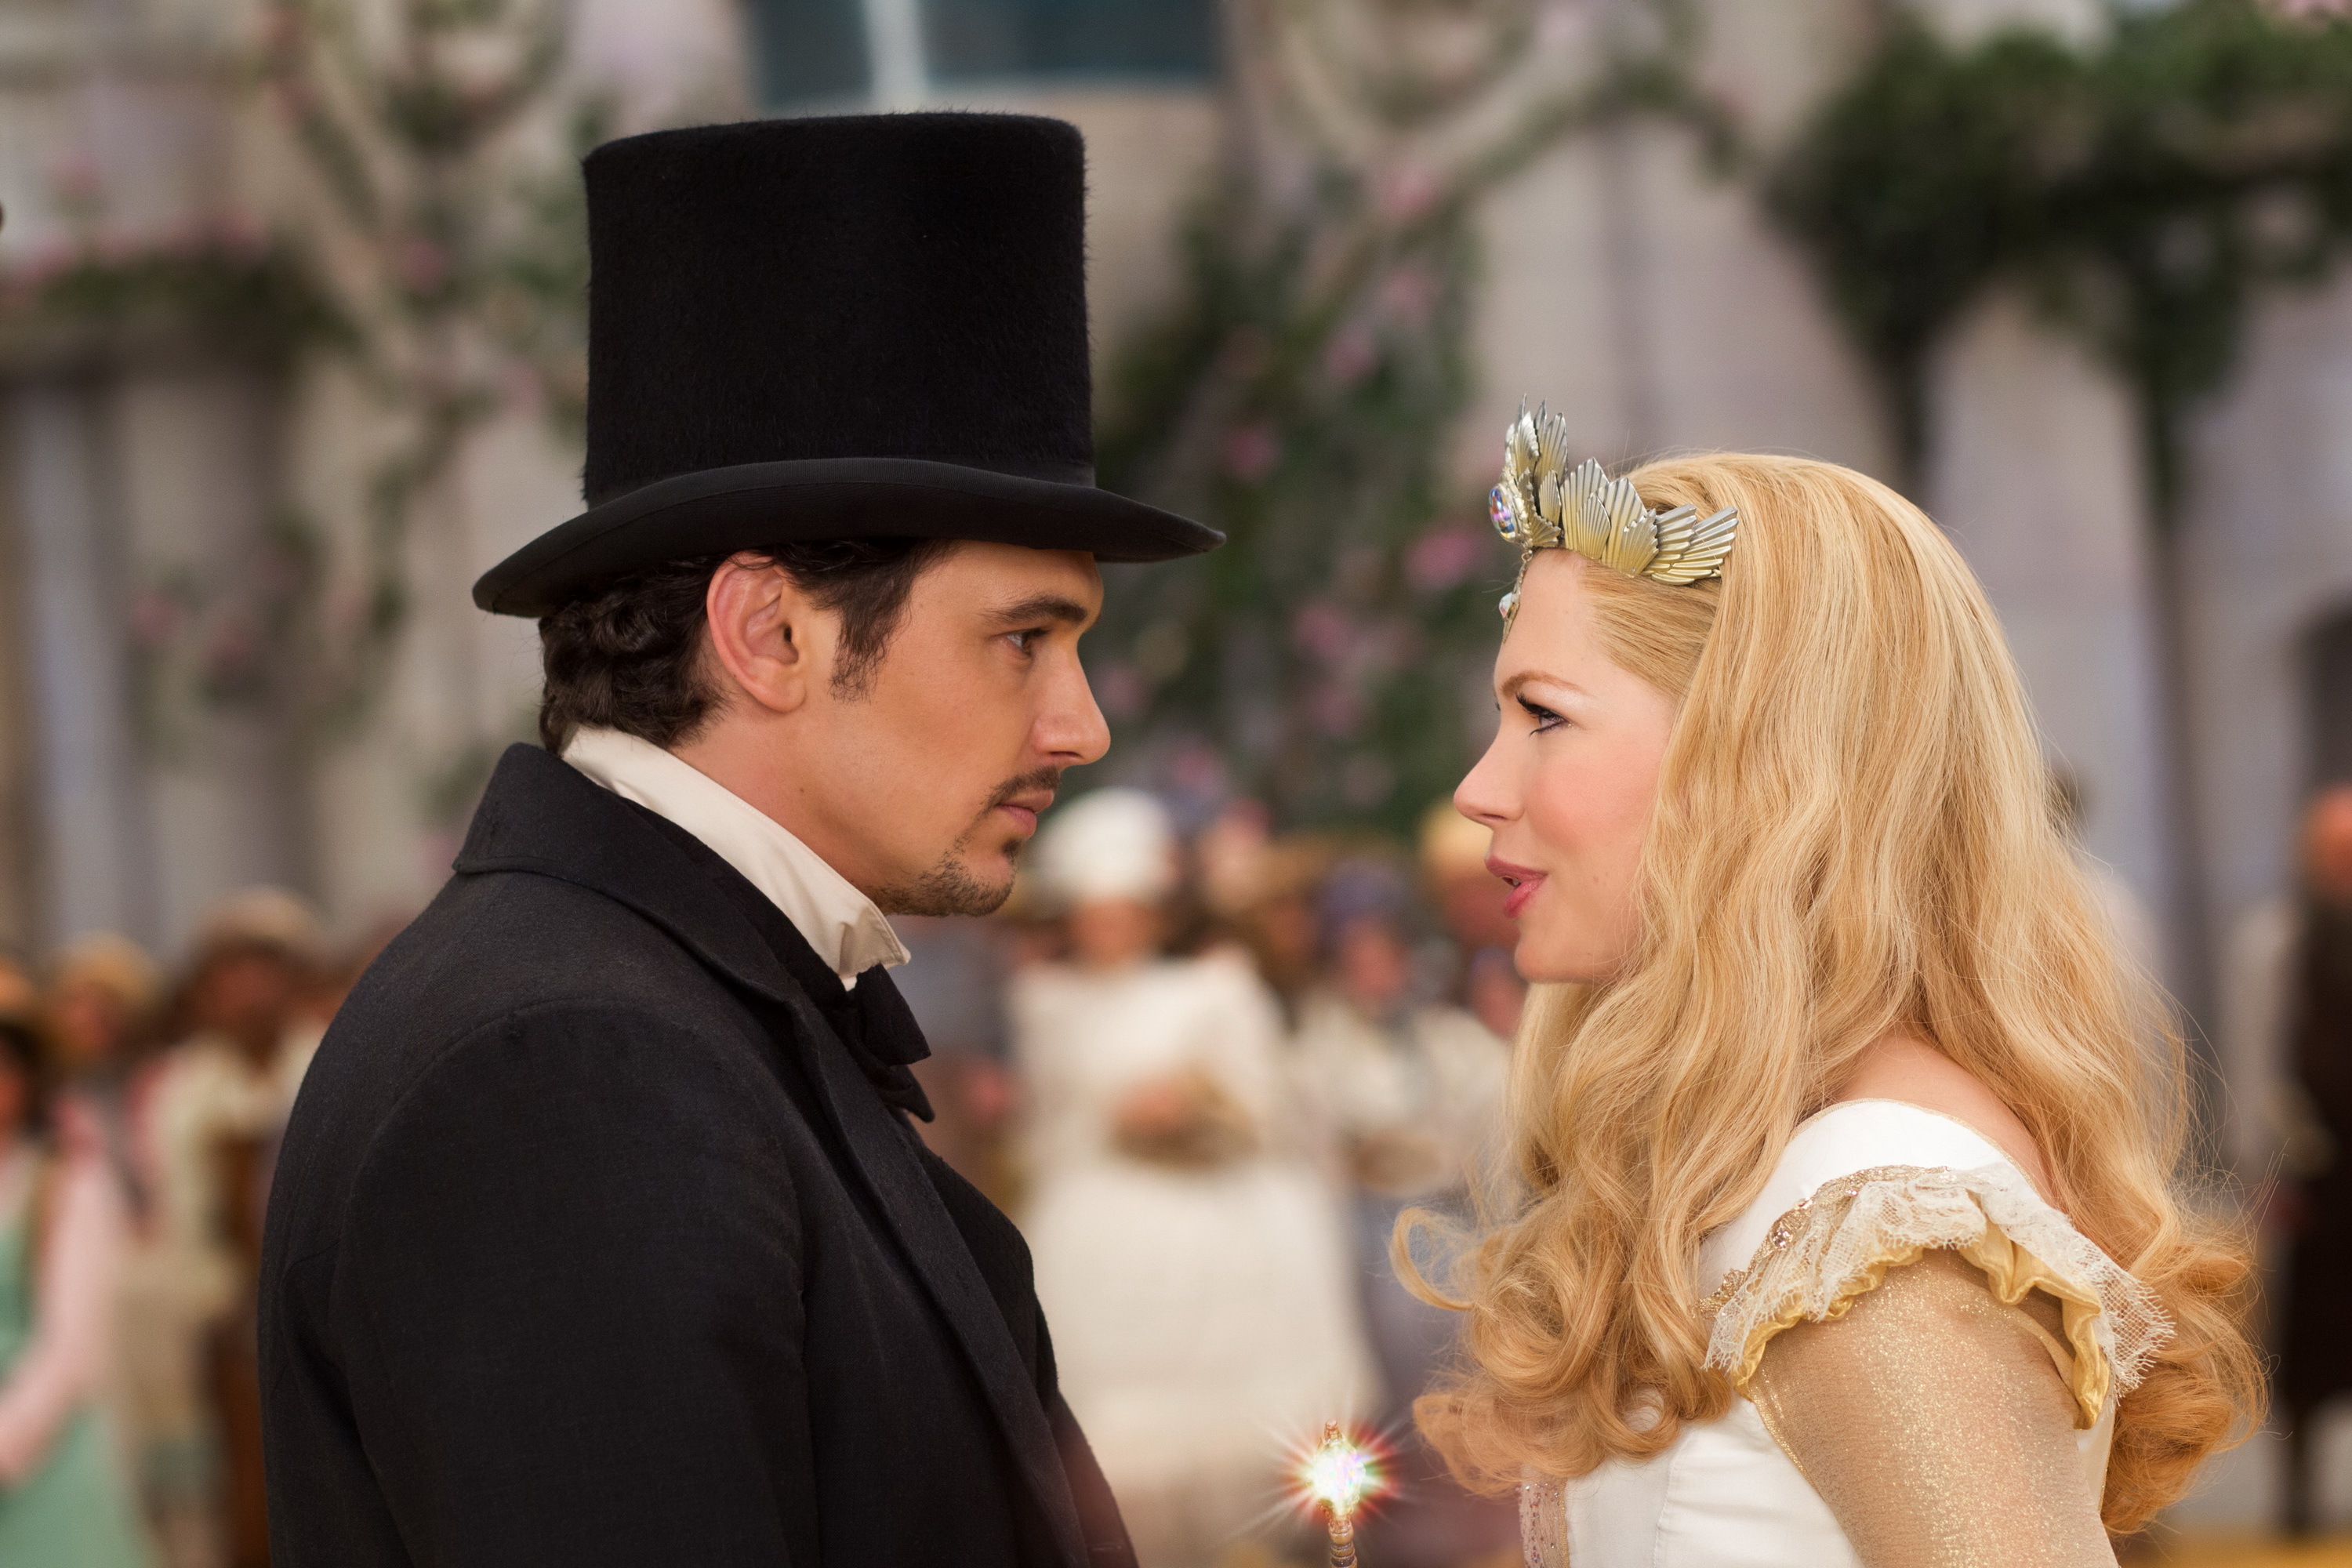 movie, oz the great and powerful, james franco, michelle williams